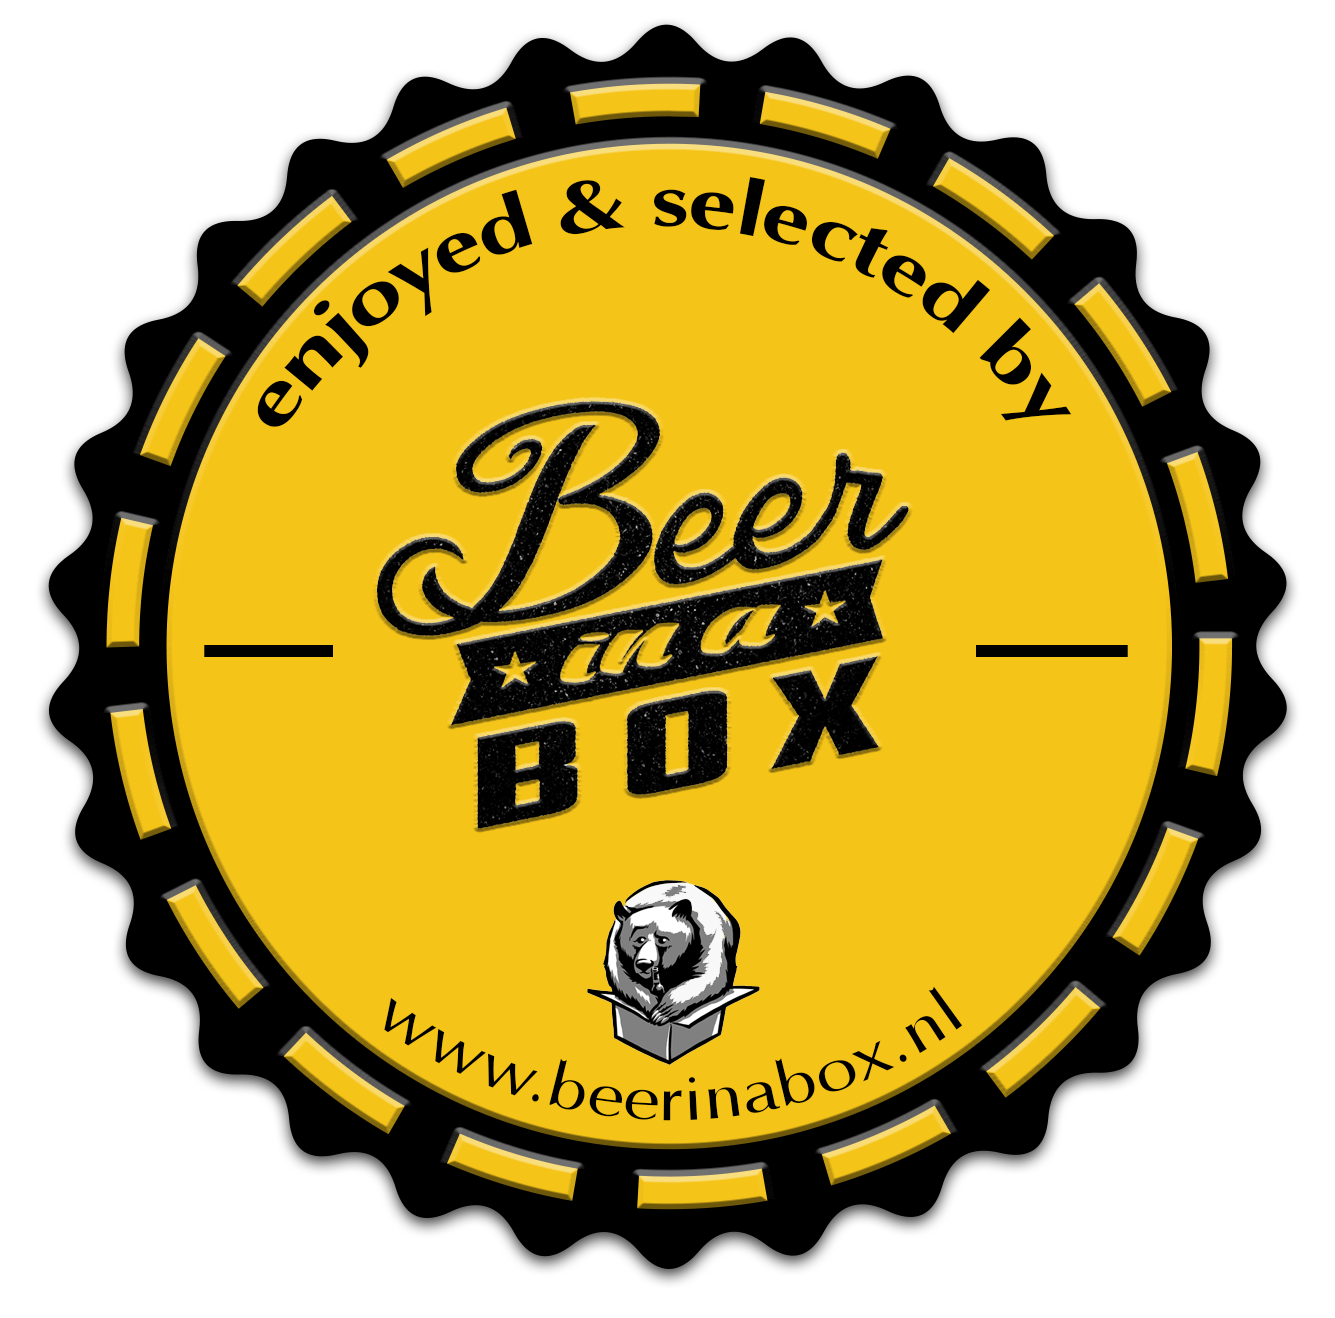 approved and selected by de Beer van Beer in a Box badge